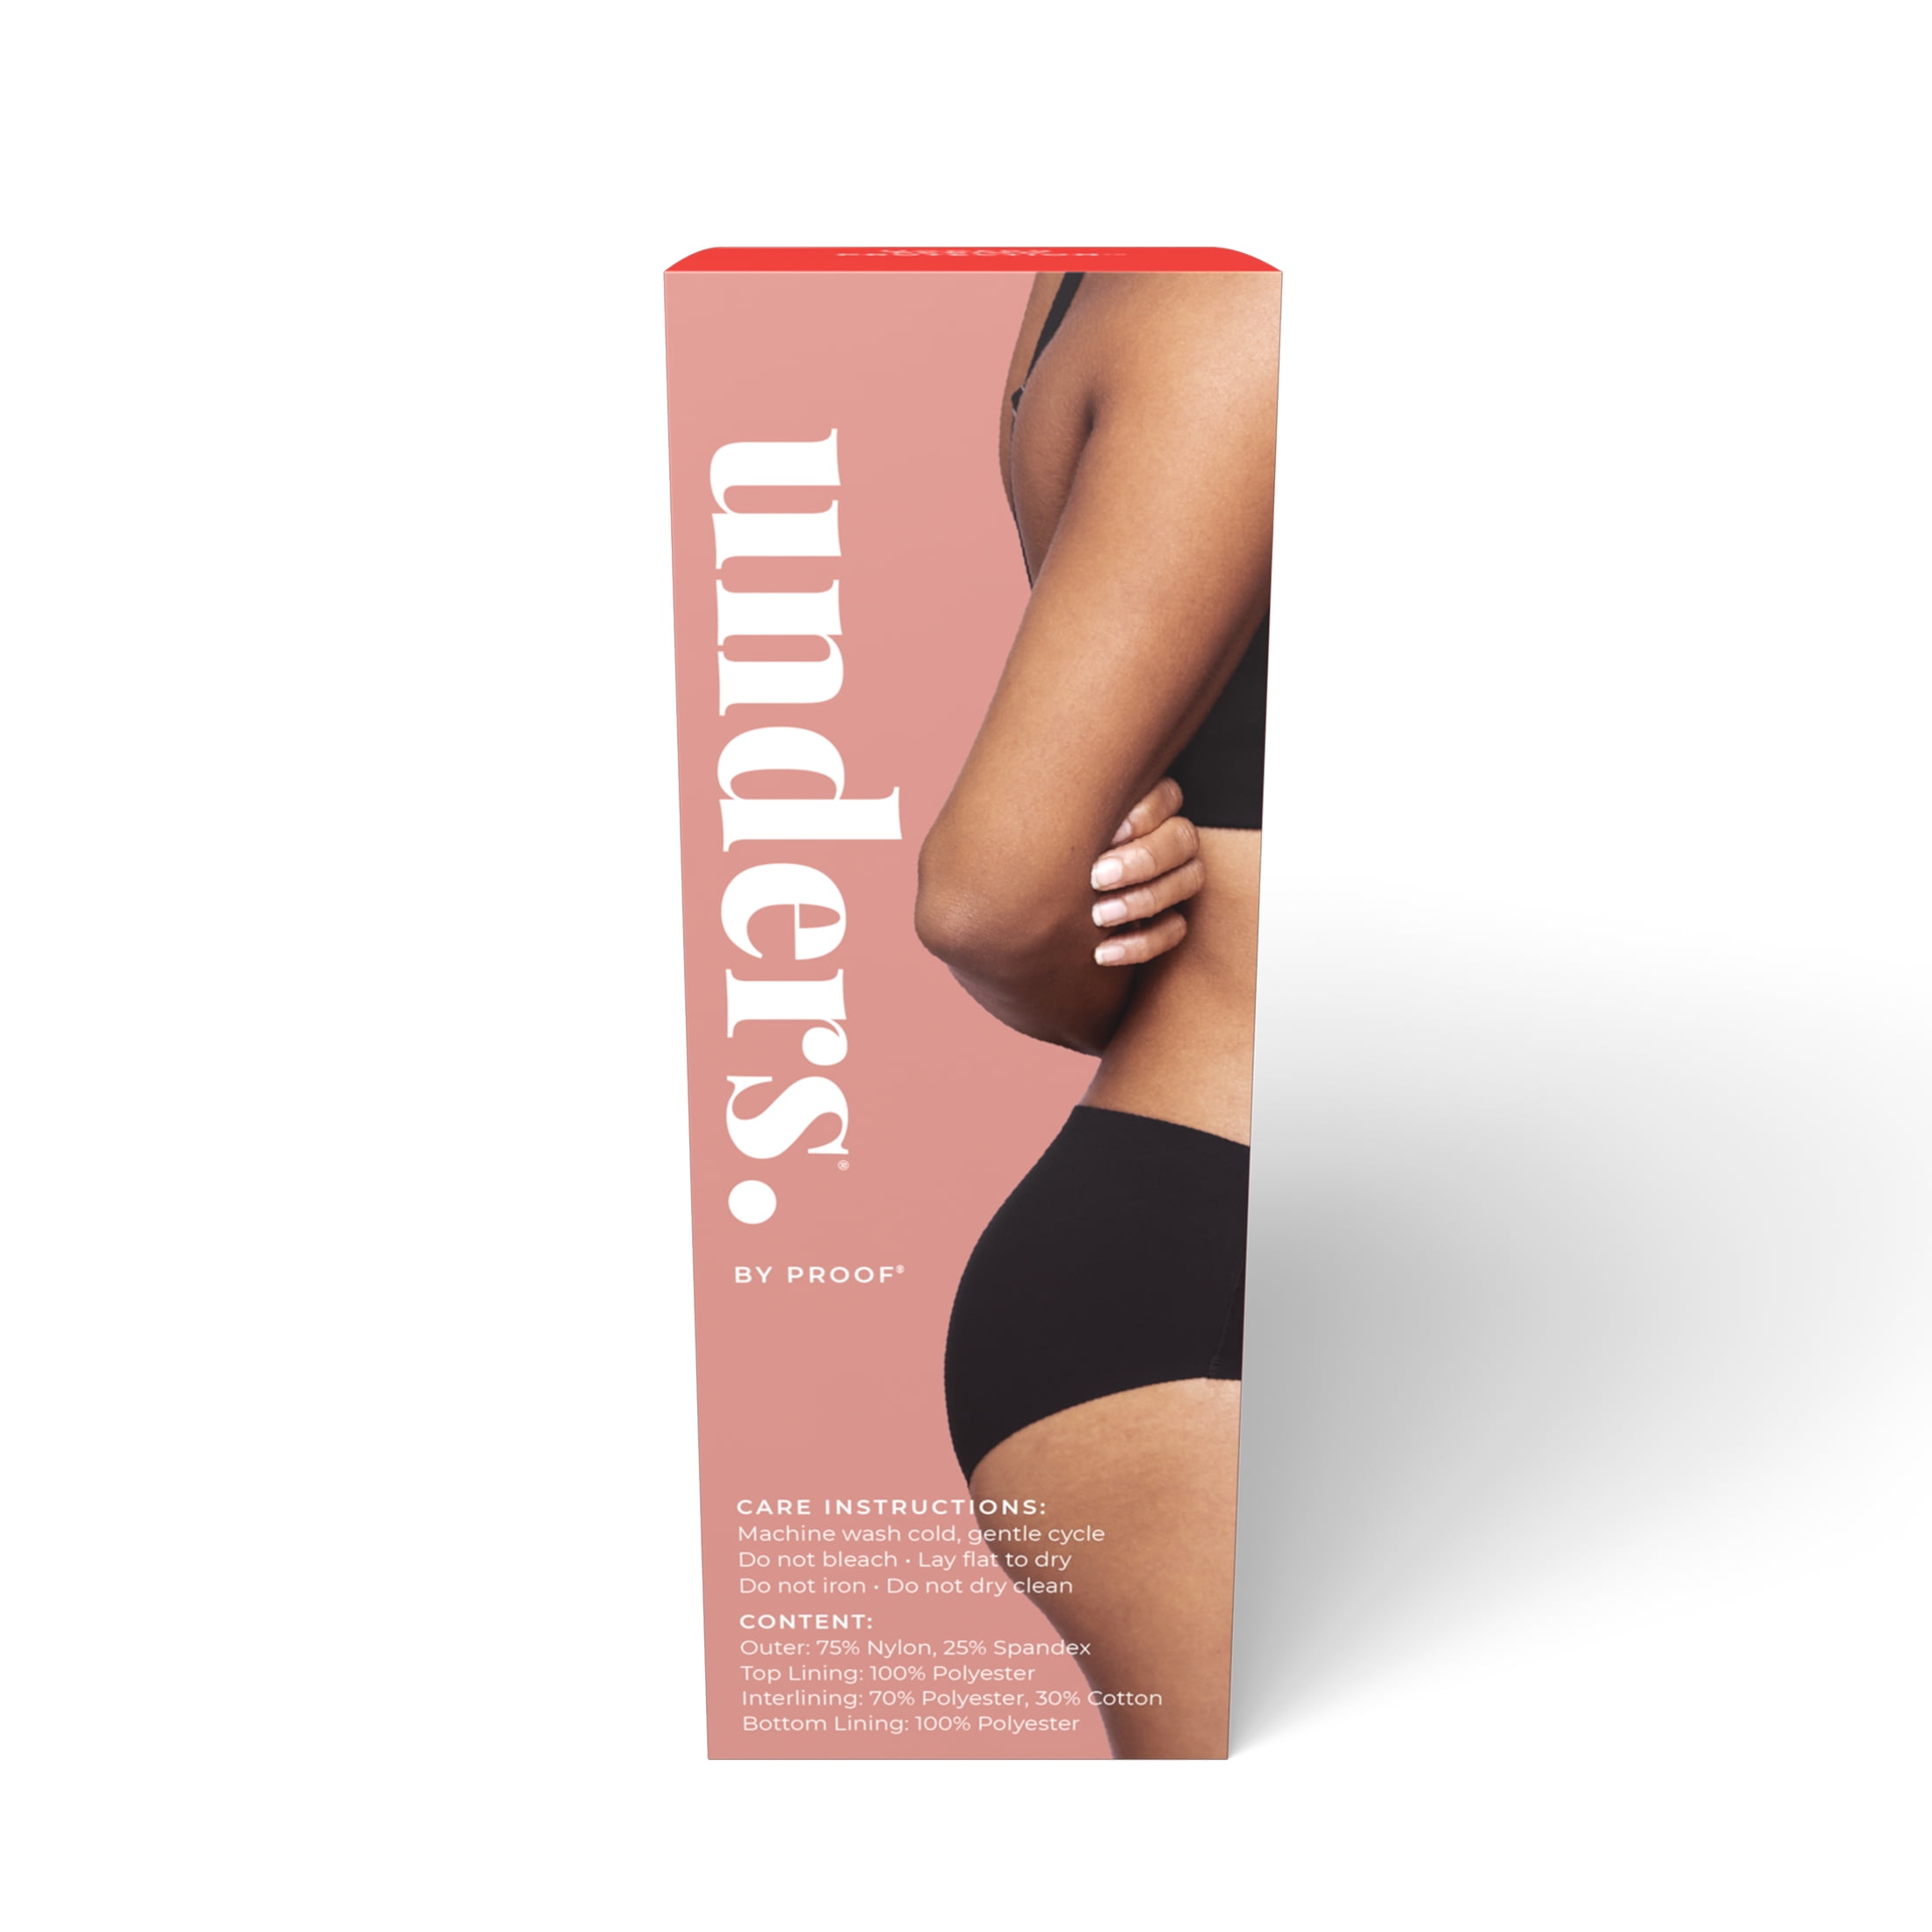 Unders by Proof Period Underwear - Heavy Brief (5 tampons / 8 tsps) 